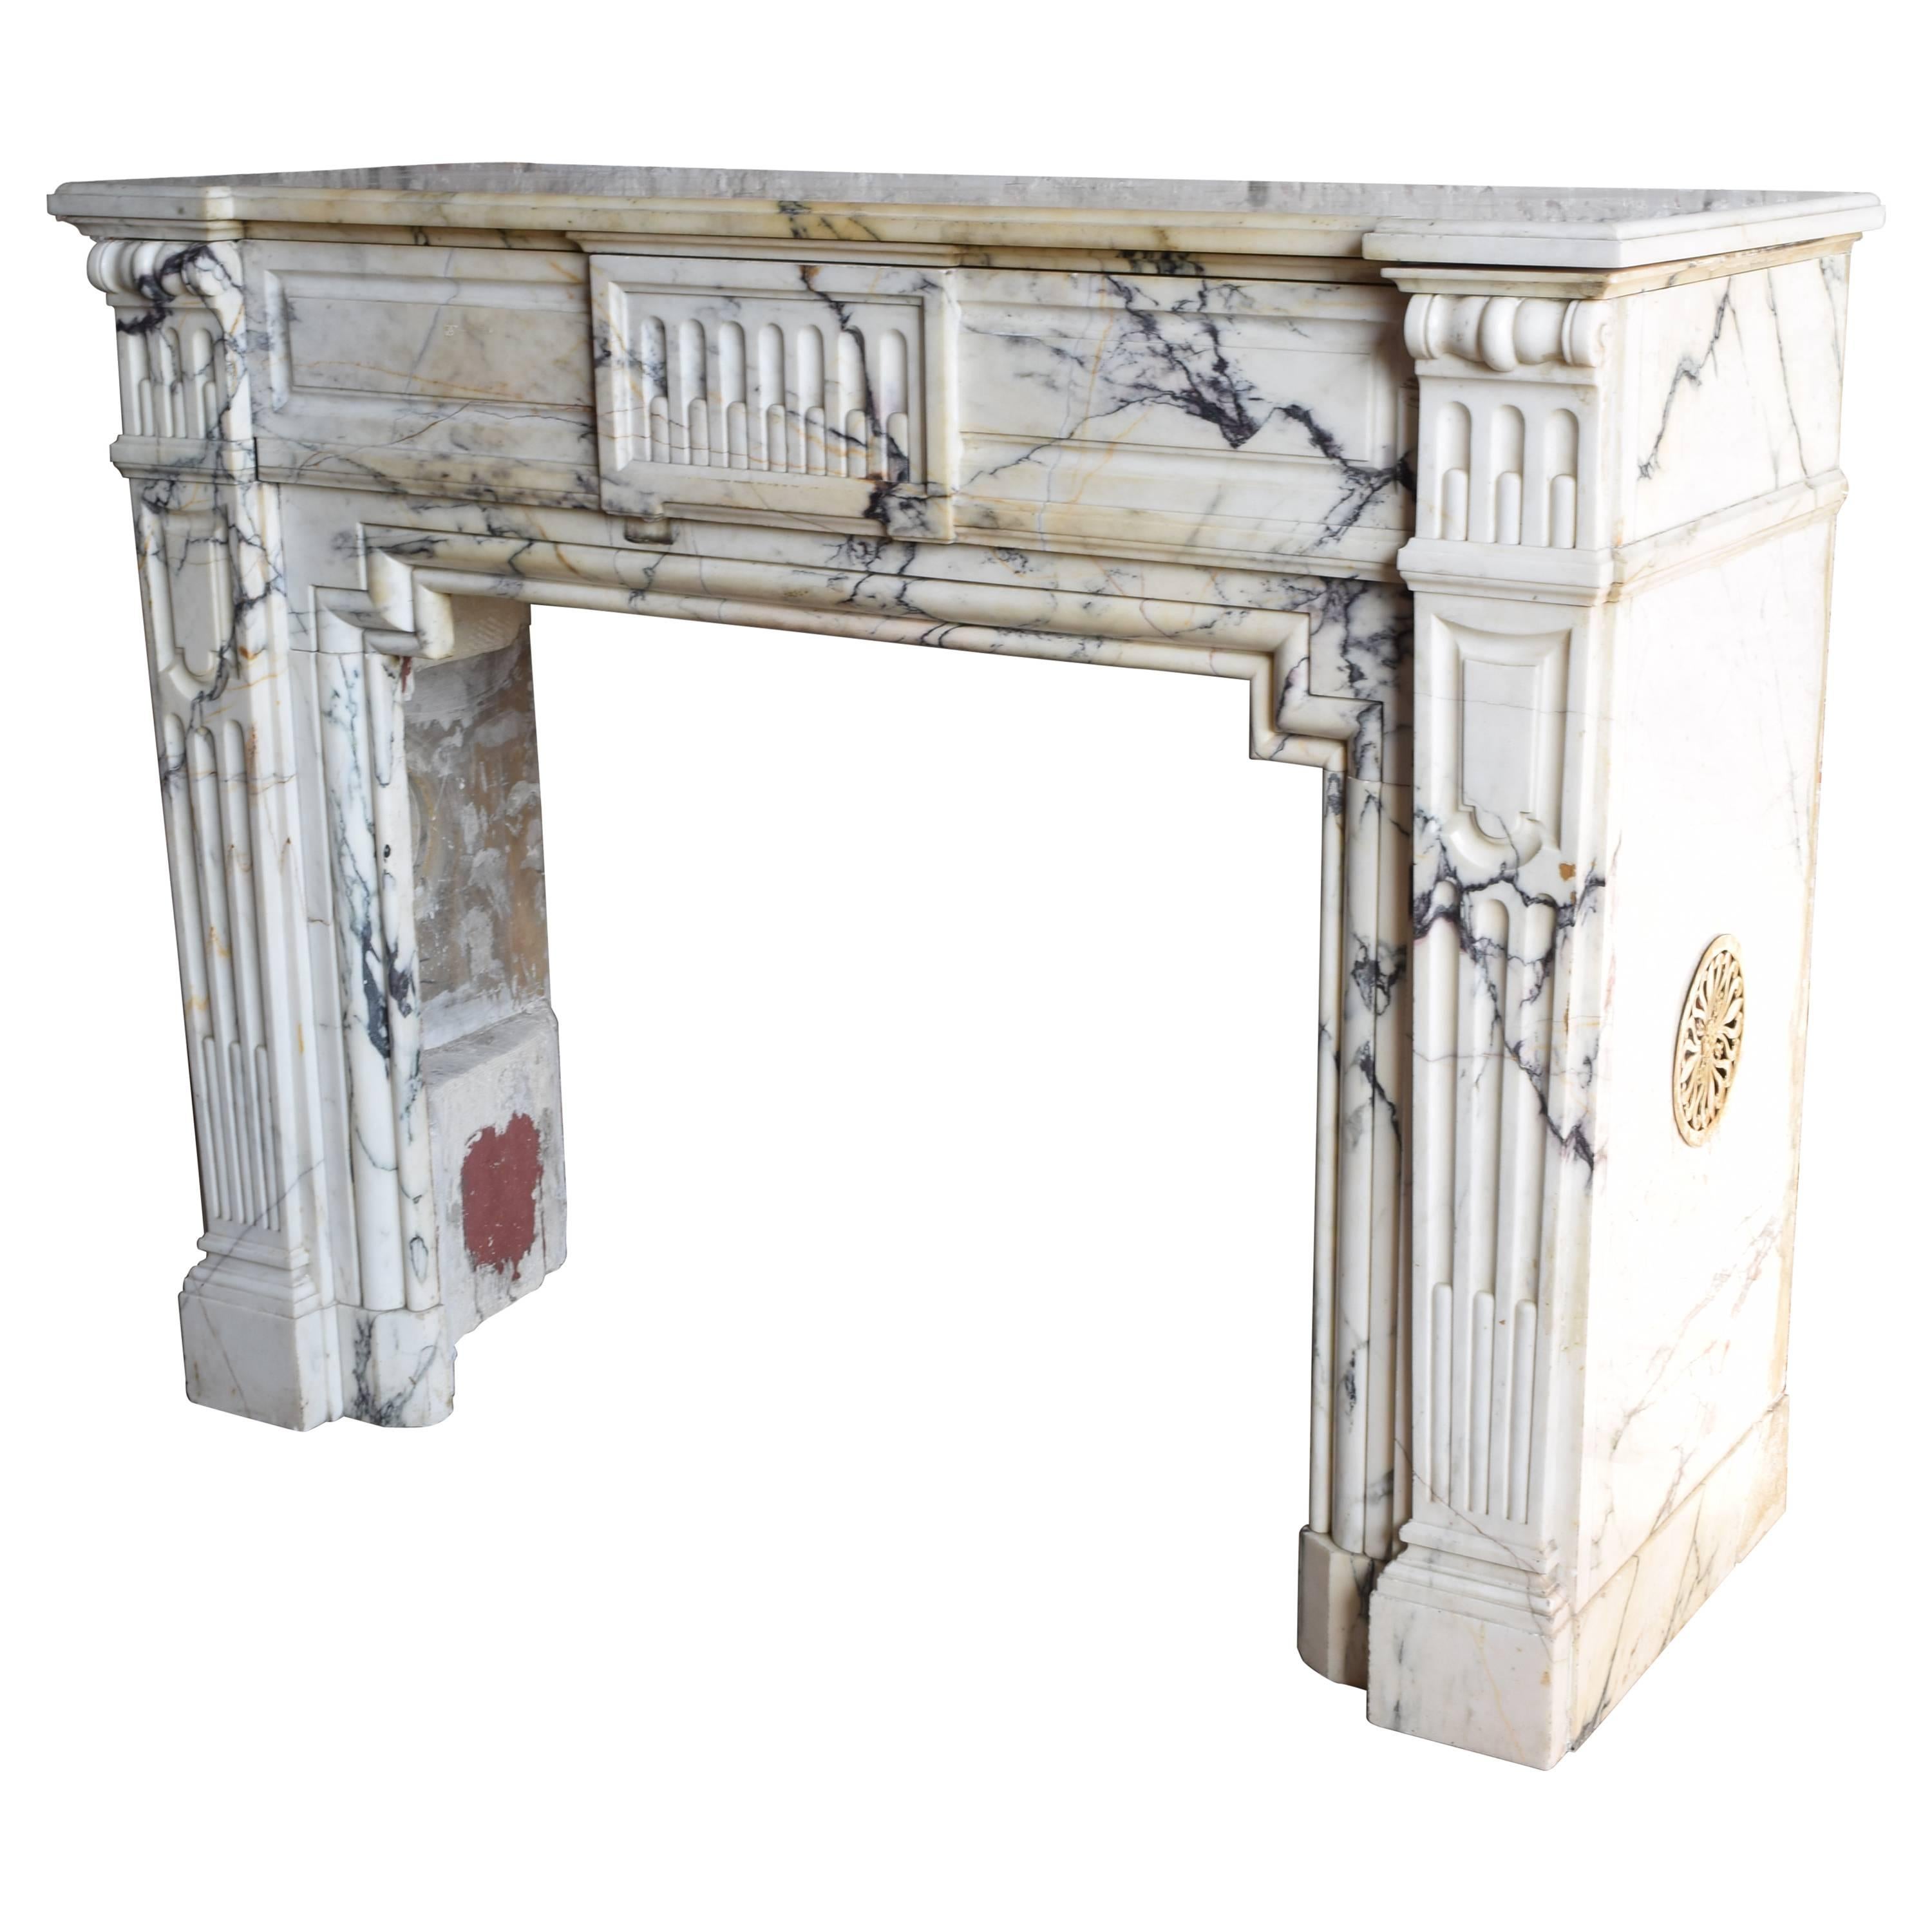 Georgian Carved Marble Mantel, Probably Arabescato Marble, 18th-19th Century